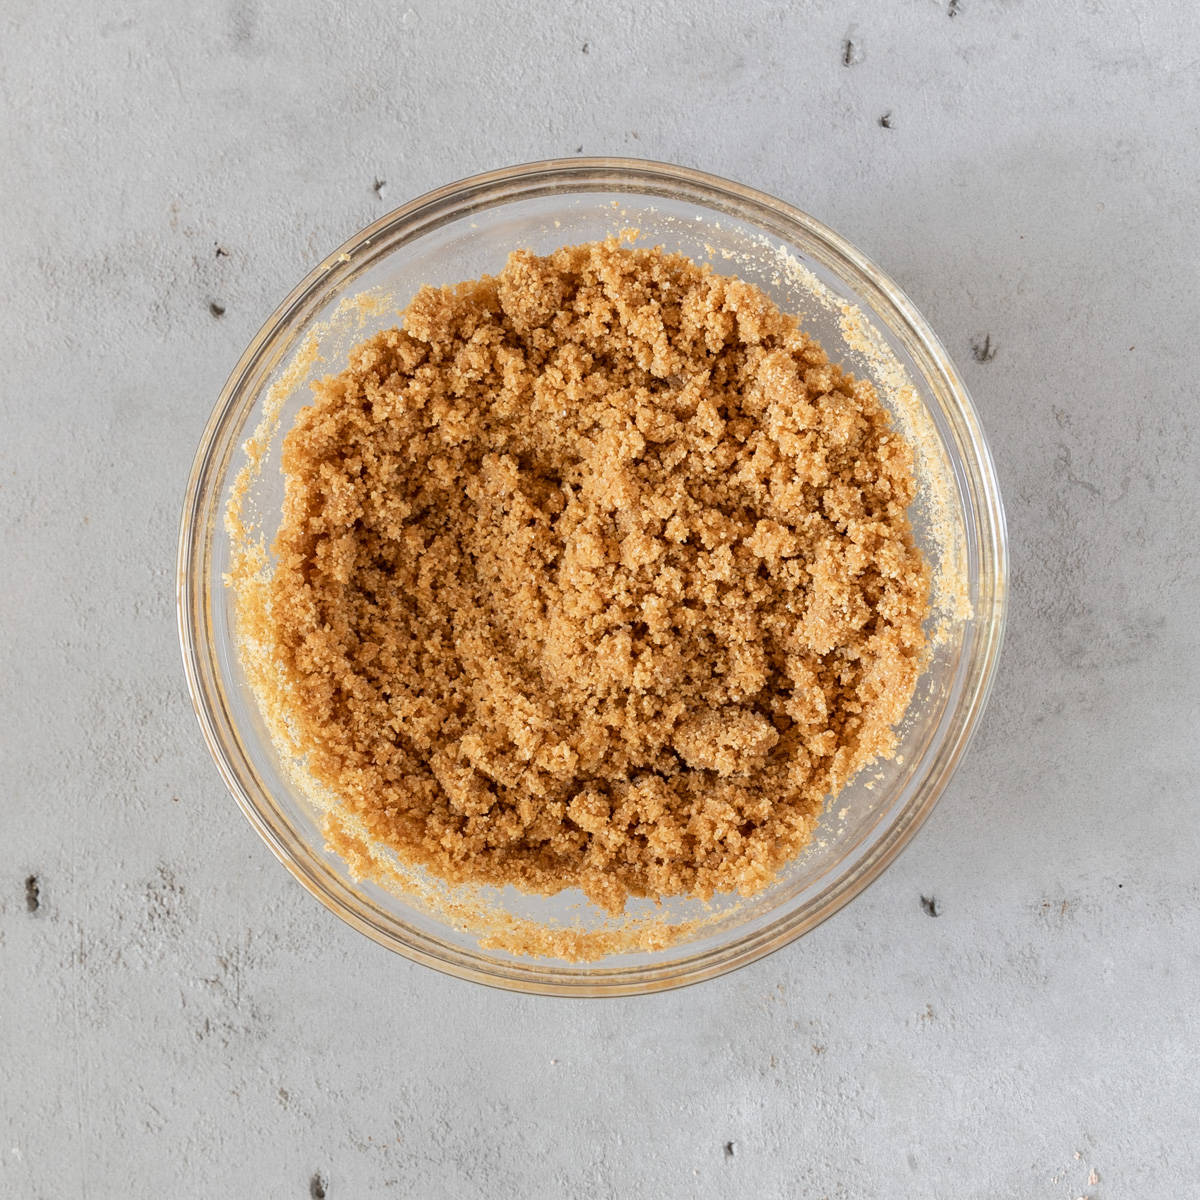 the graham cracker crust ingredients combined in a glass bowl on a grey background.